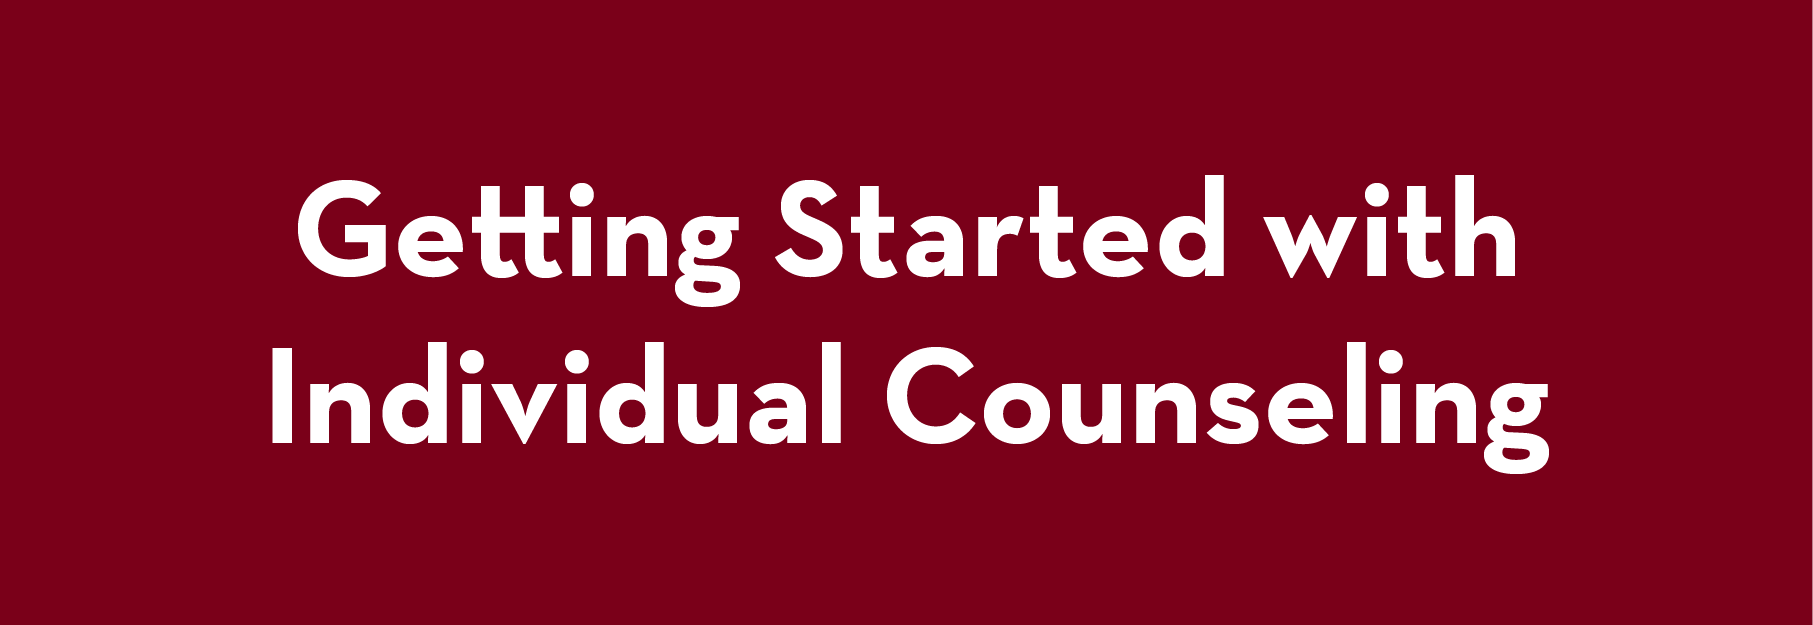 Getting Started with Individual Counseling